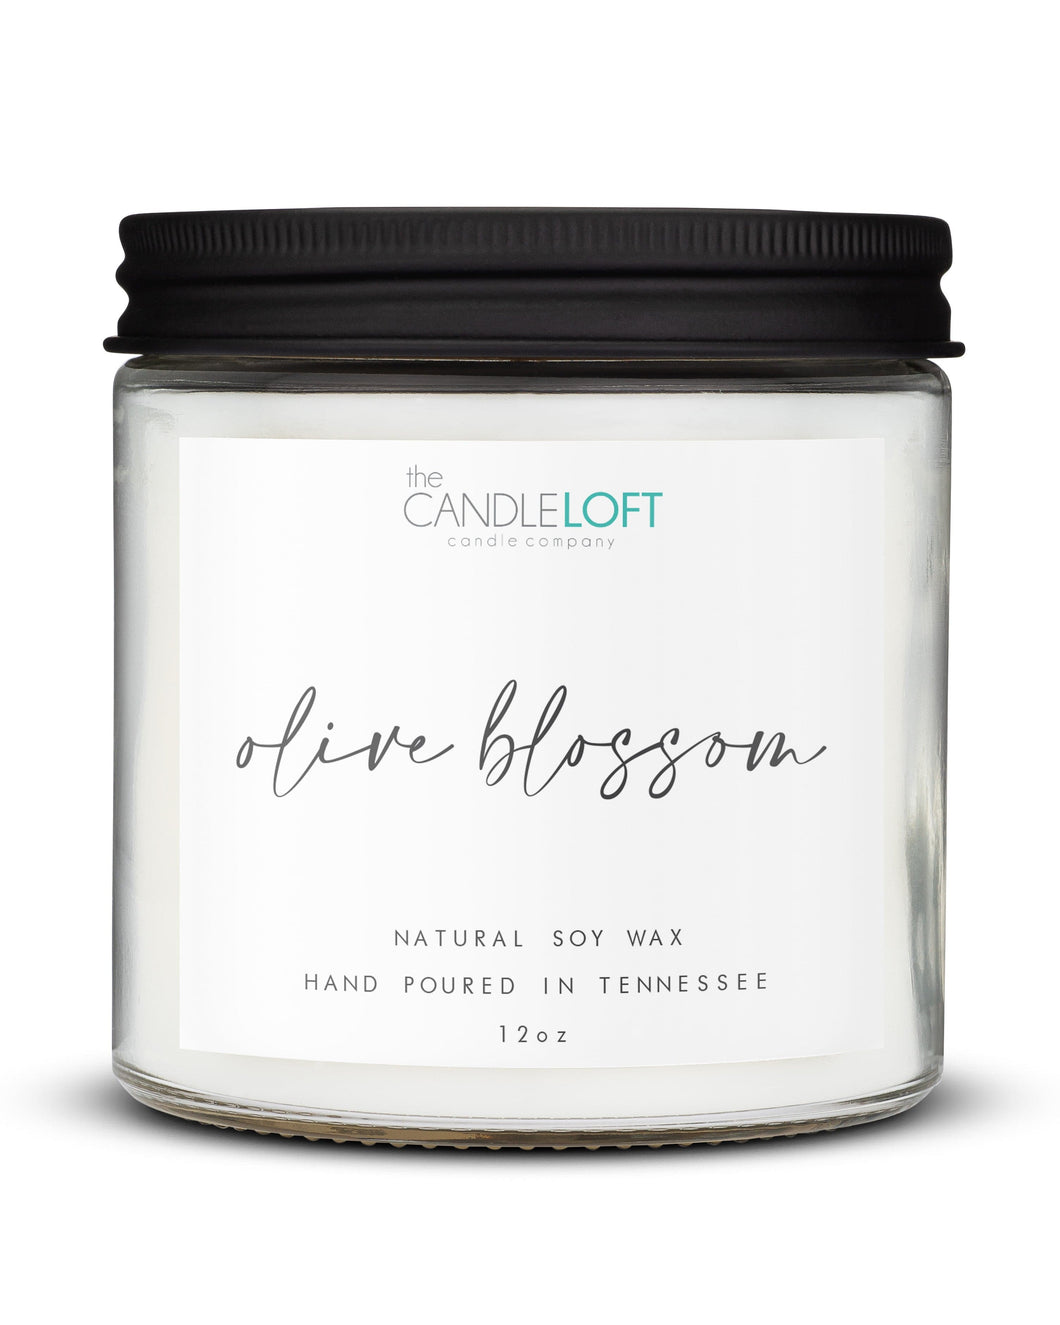 The Candle Loft Candles Signature 12oz Olive Blossom Candle